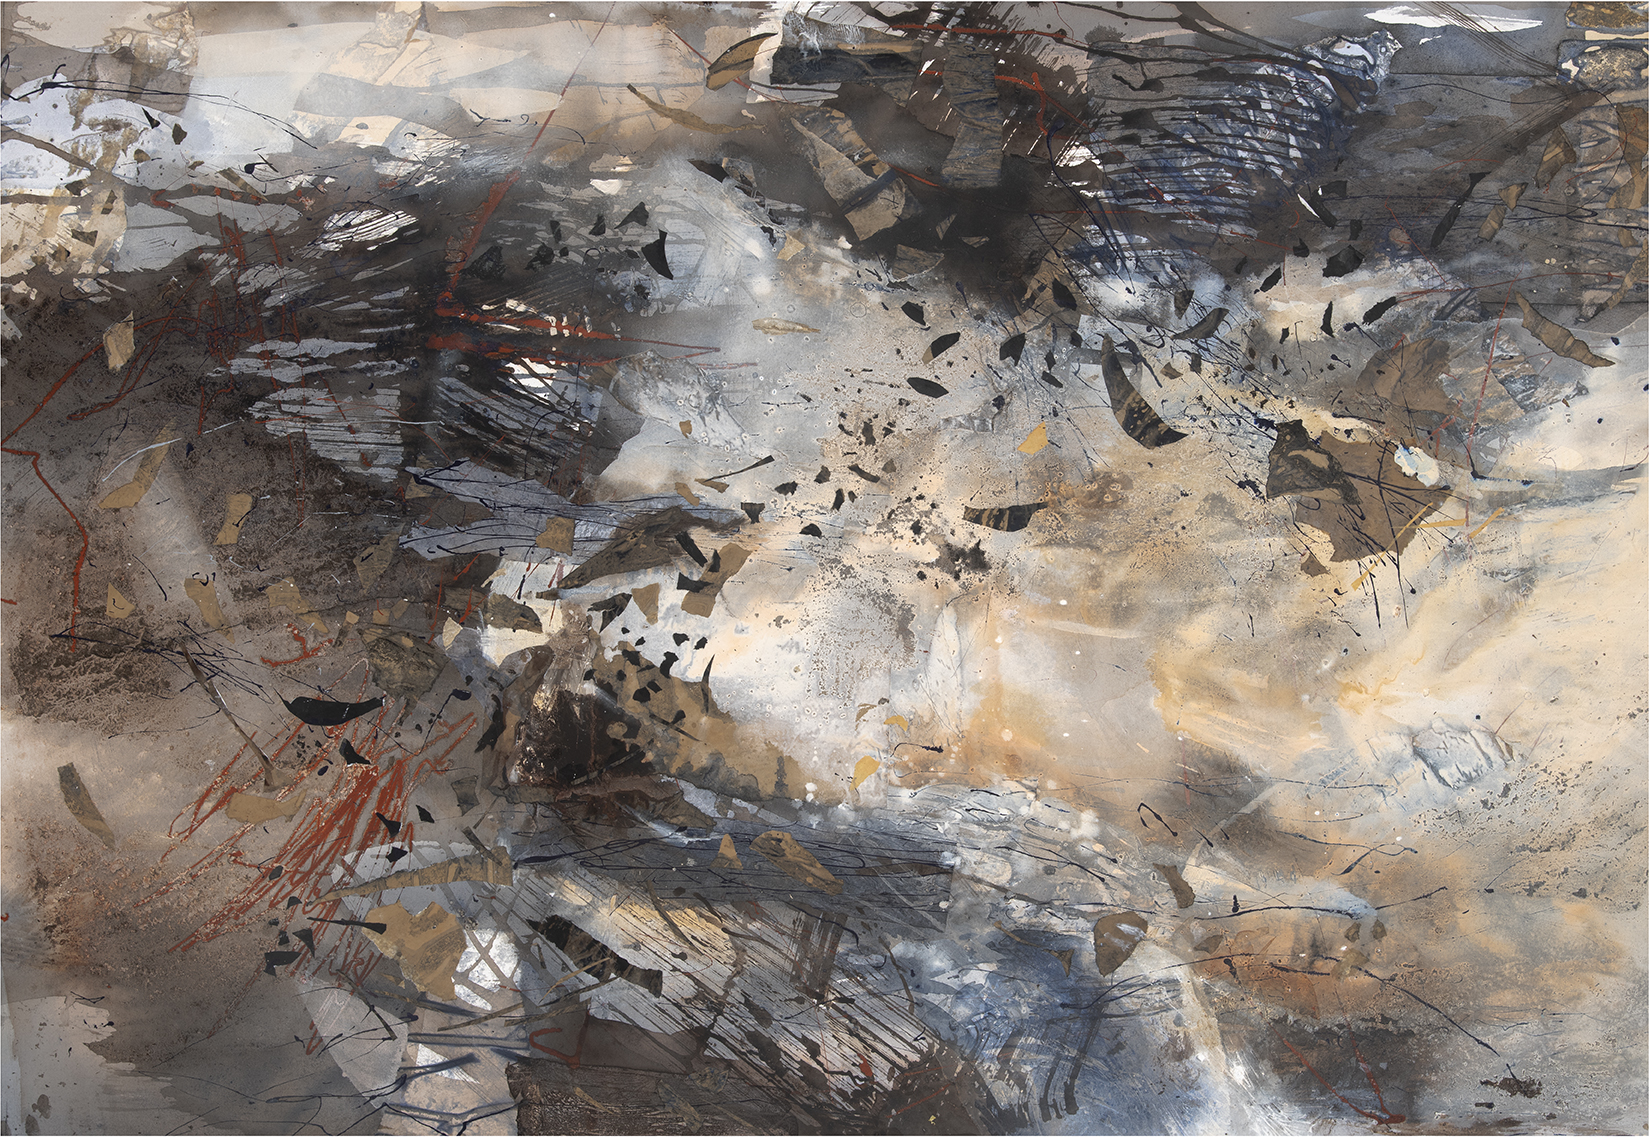 Judith White 'Ash on Water' collage and acrylic on canvas 125 x 180cm $19,000